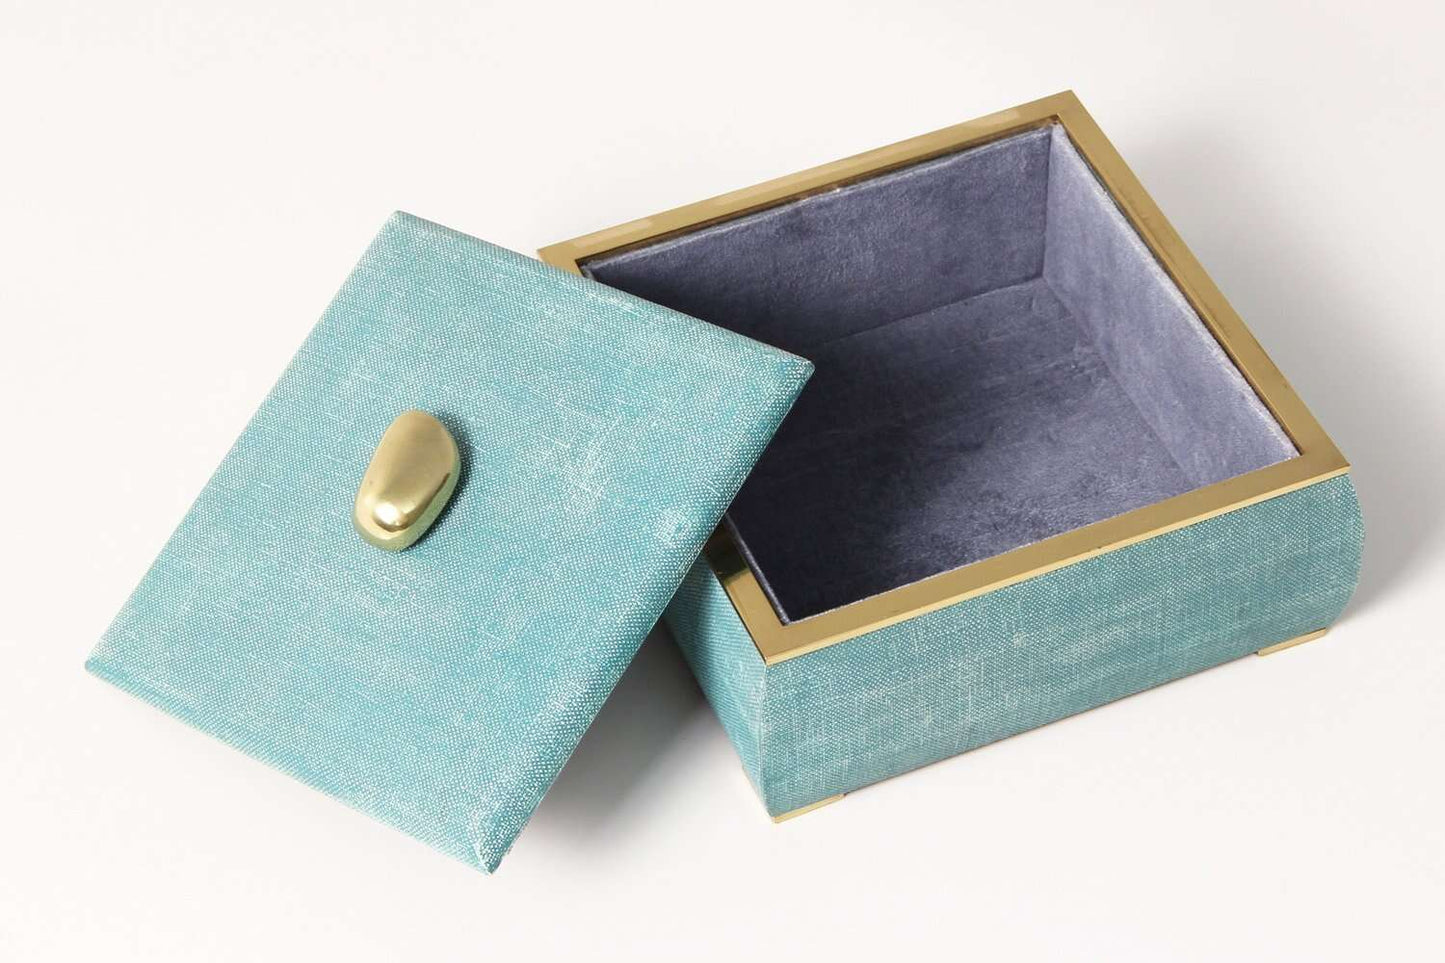 Sophie Box in Teal Linen